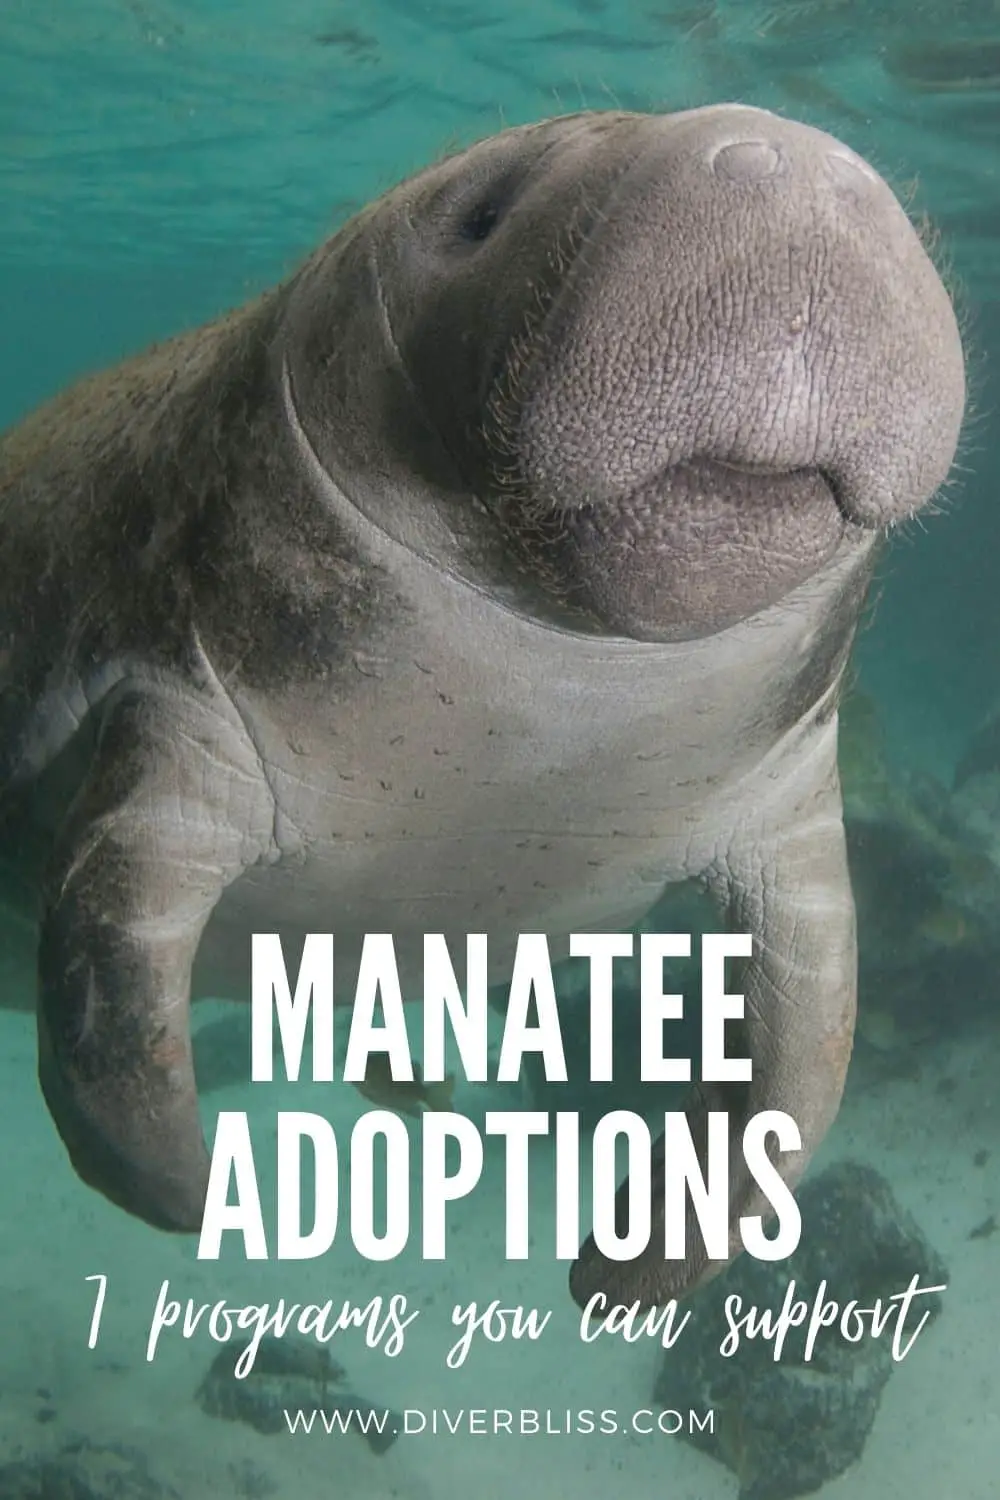 manatee adoptions programs you can support